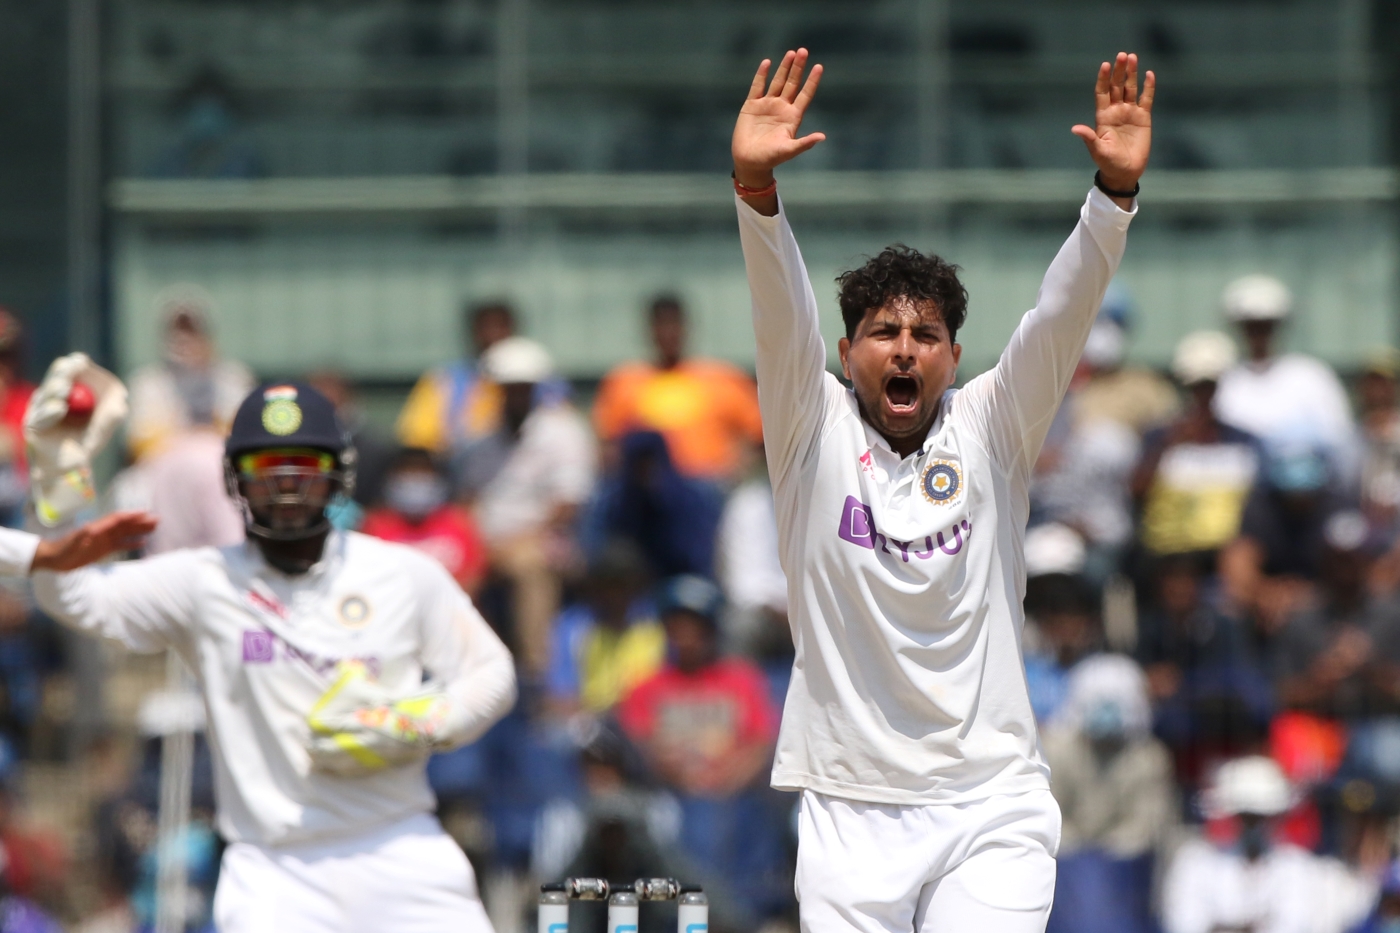 Kuldeep would have at least picked 30 wickets if he played all games against England, opines Kapil Pandey